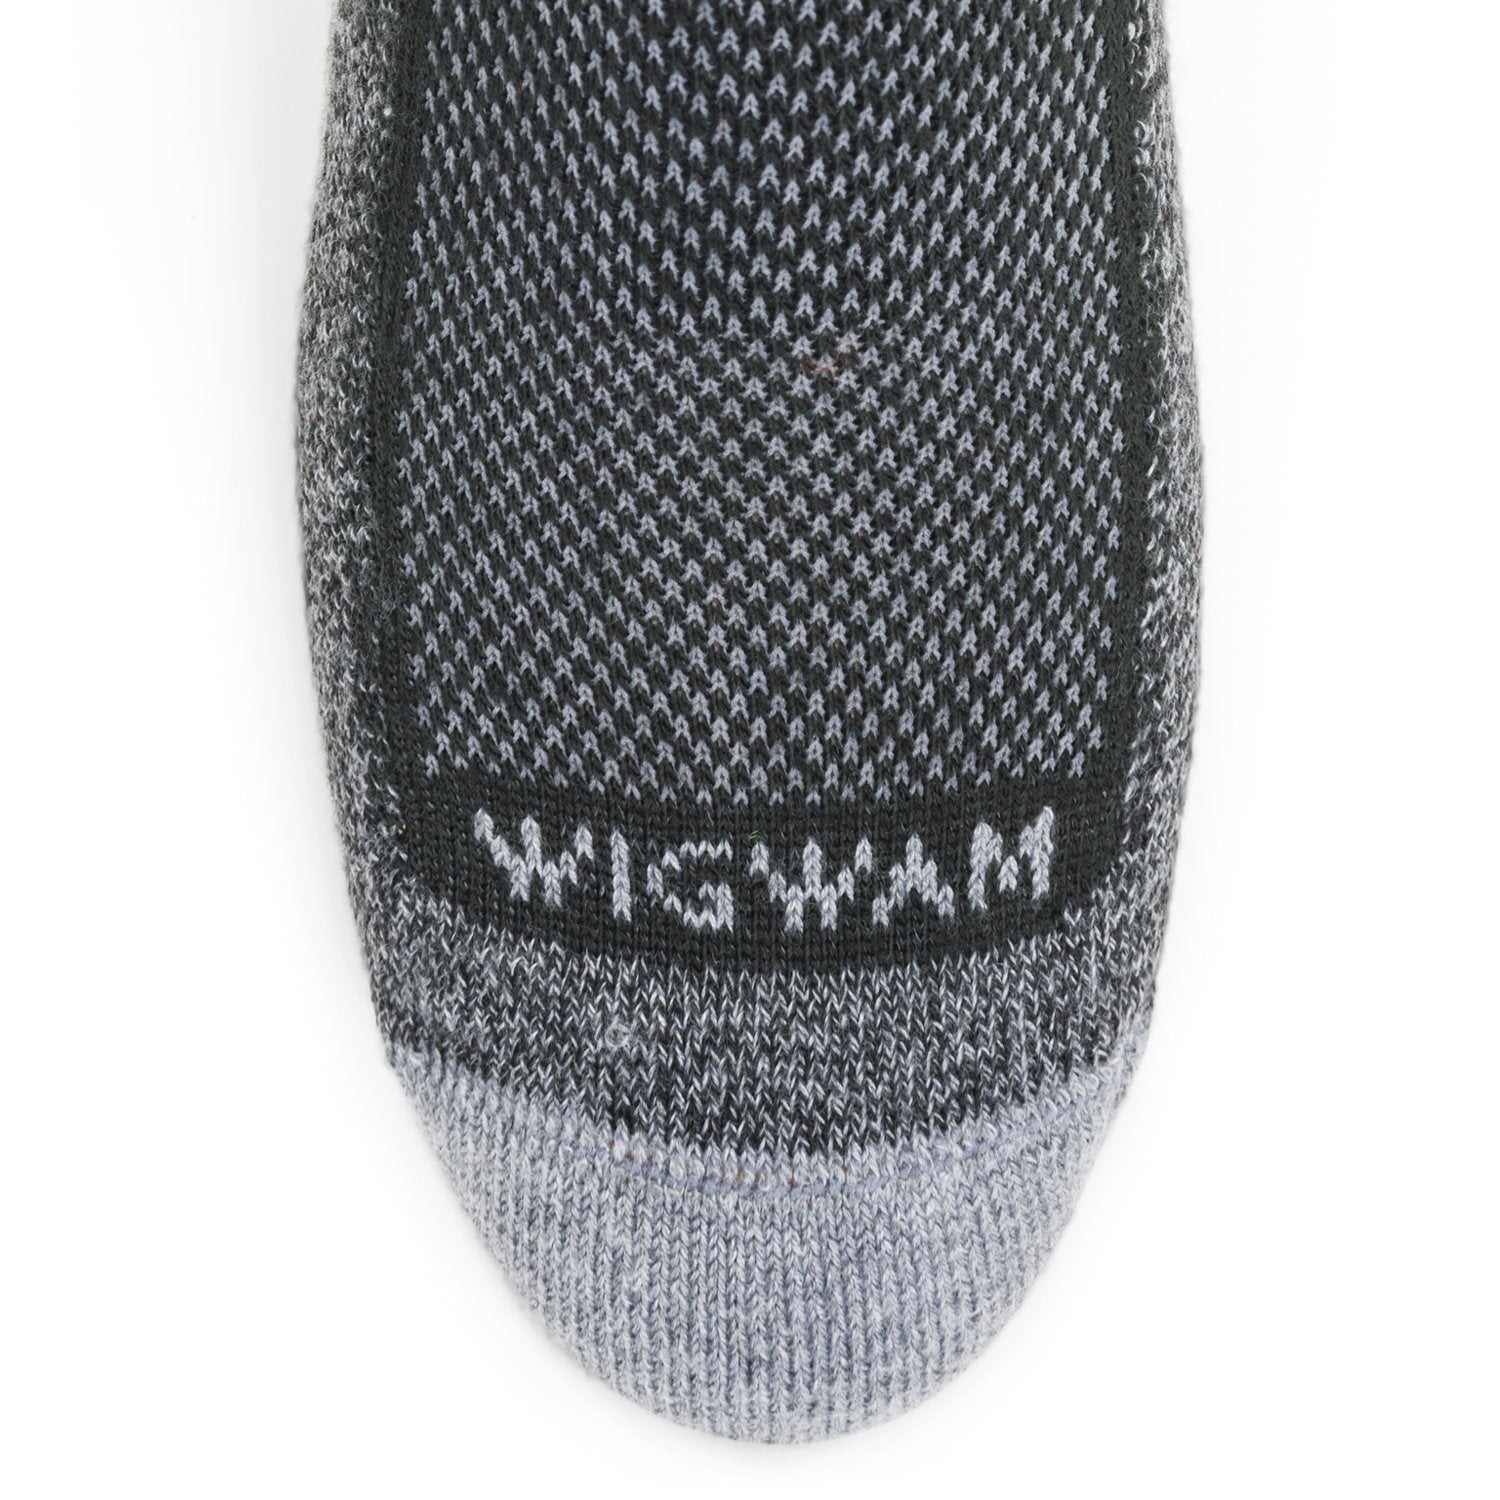 Cool-Lite Hiker Crew Midweight Sock - Black/Grey toe perspective - made in The USA Wigwam Socks